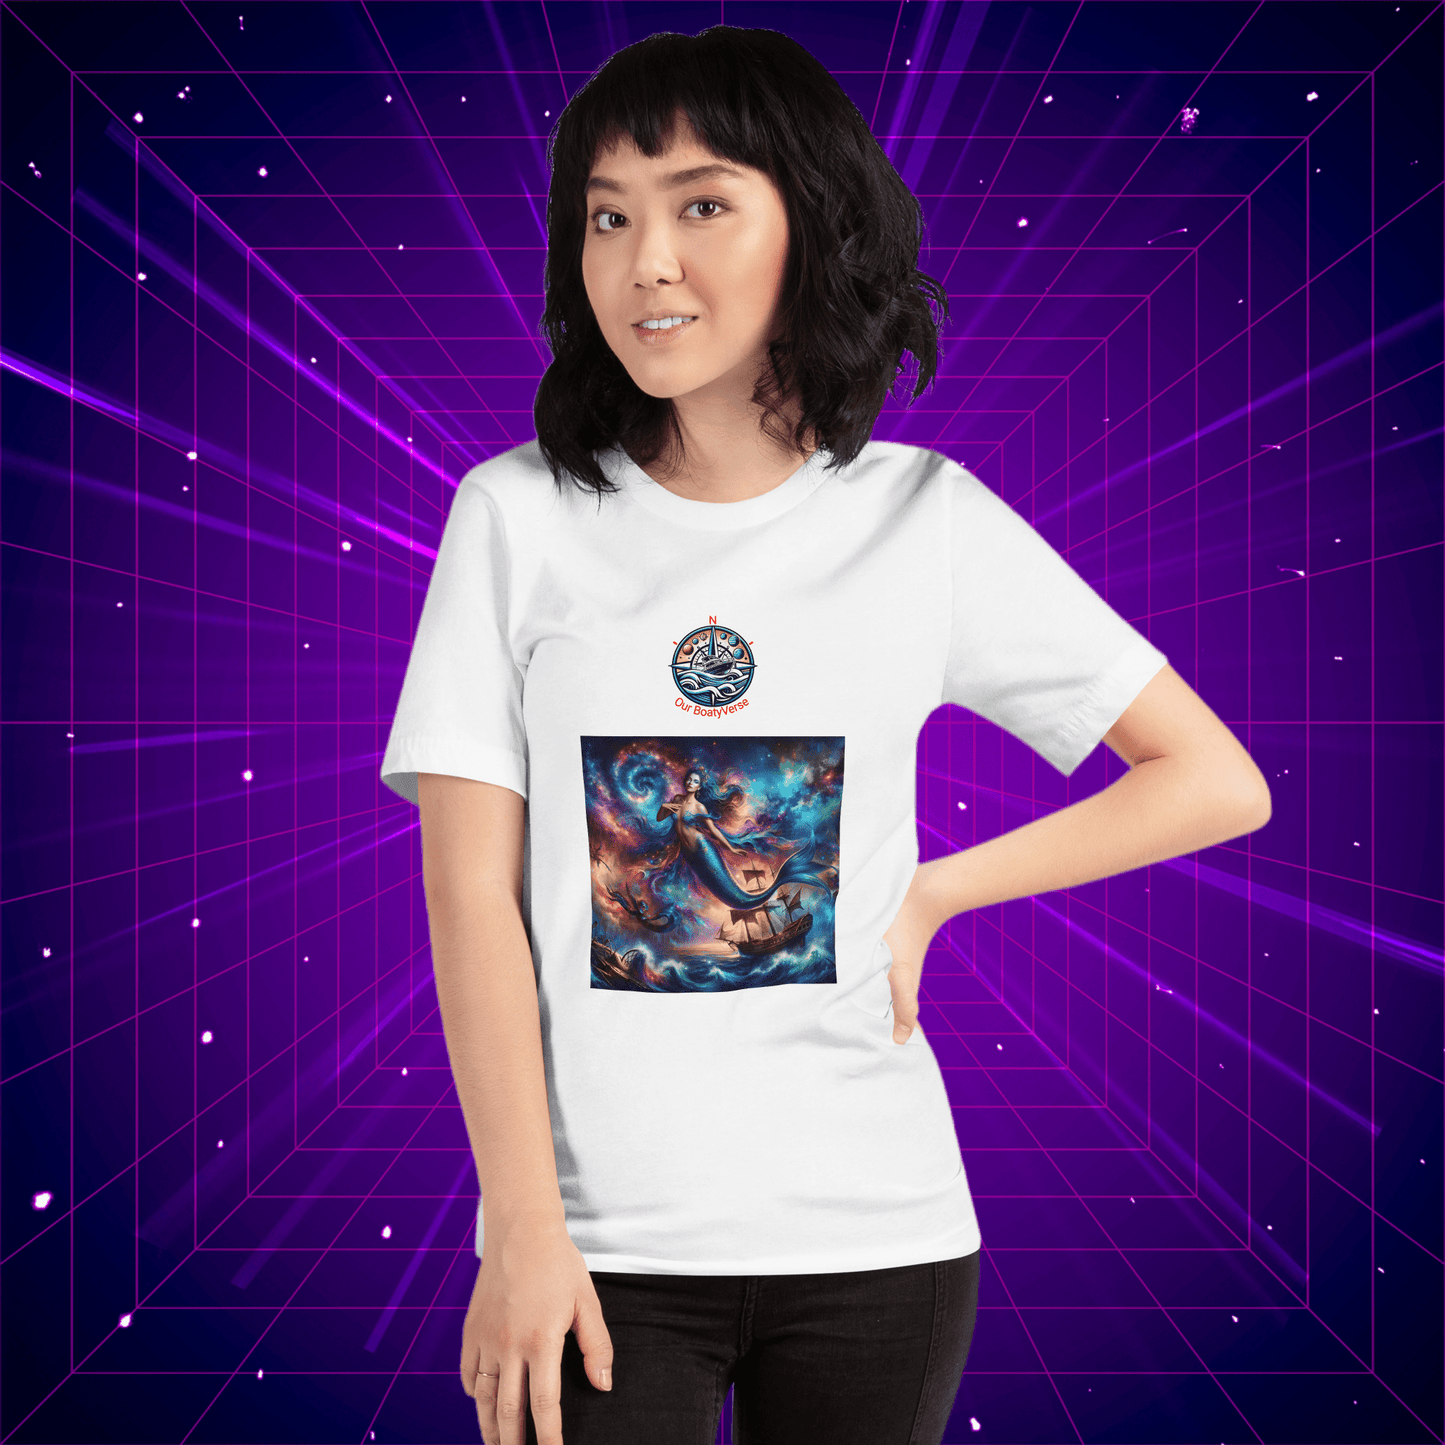 Mermaid of the Vortex T-shirt by Our BoatyVerse